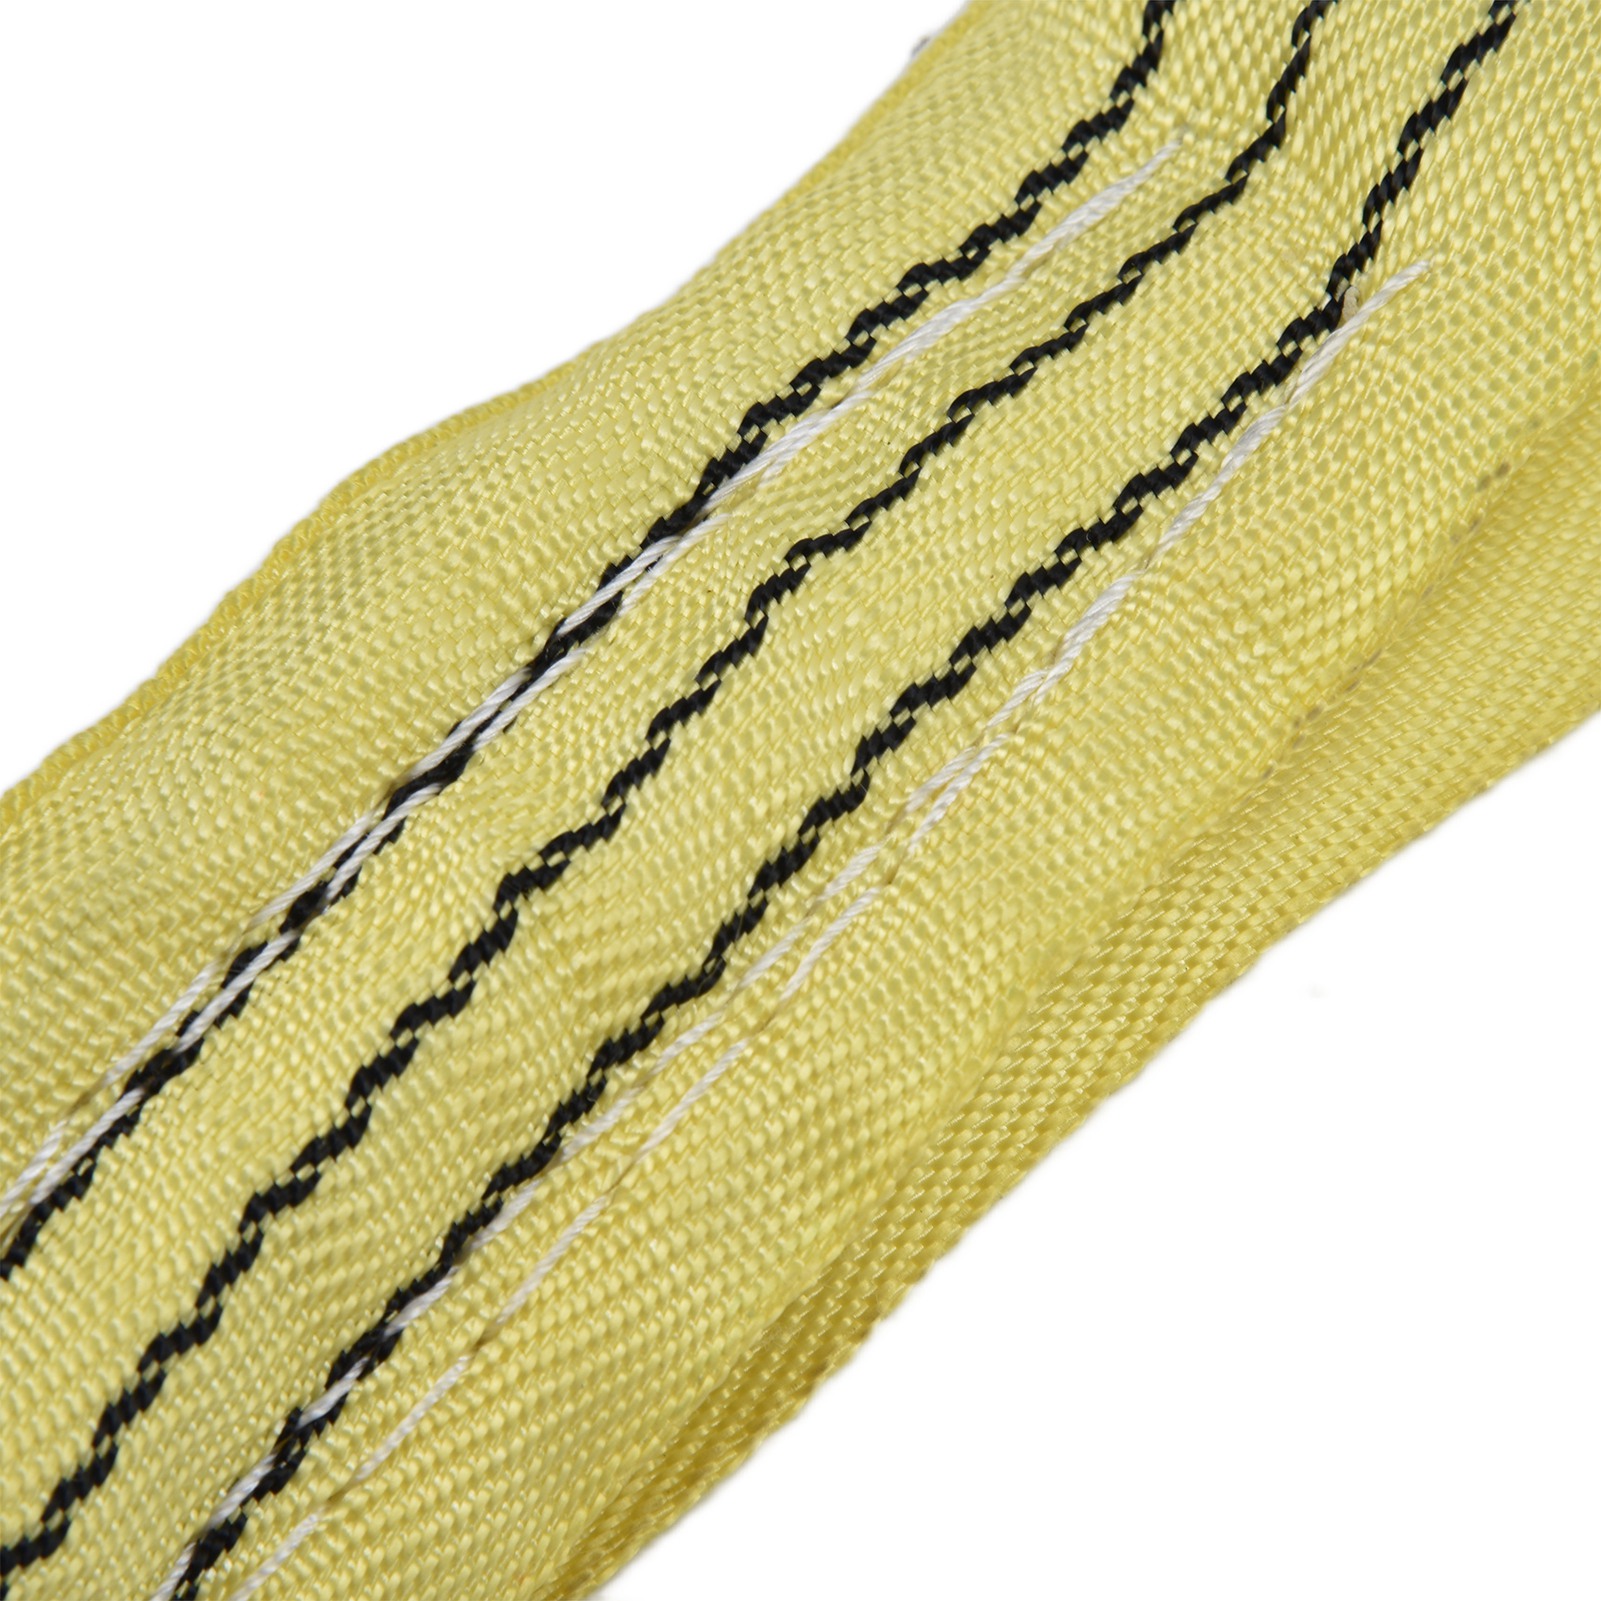 EN1492-2 100% high-strength Polyester Round lifting sling-endless round slings for lifting